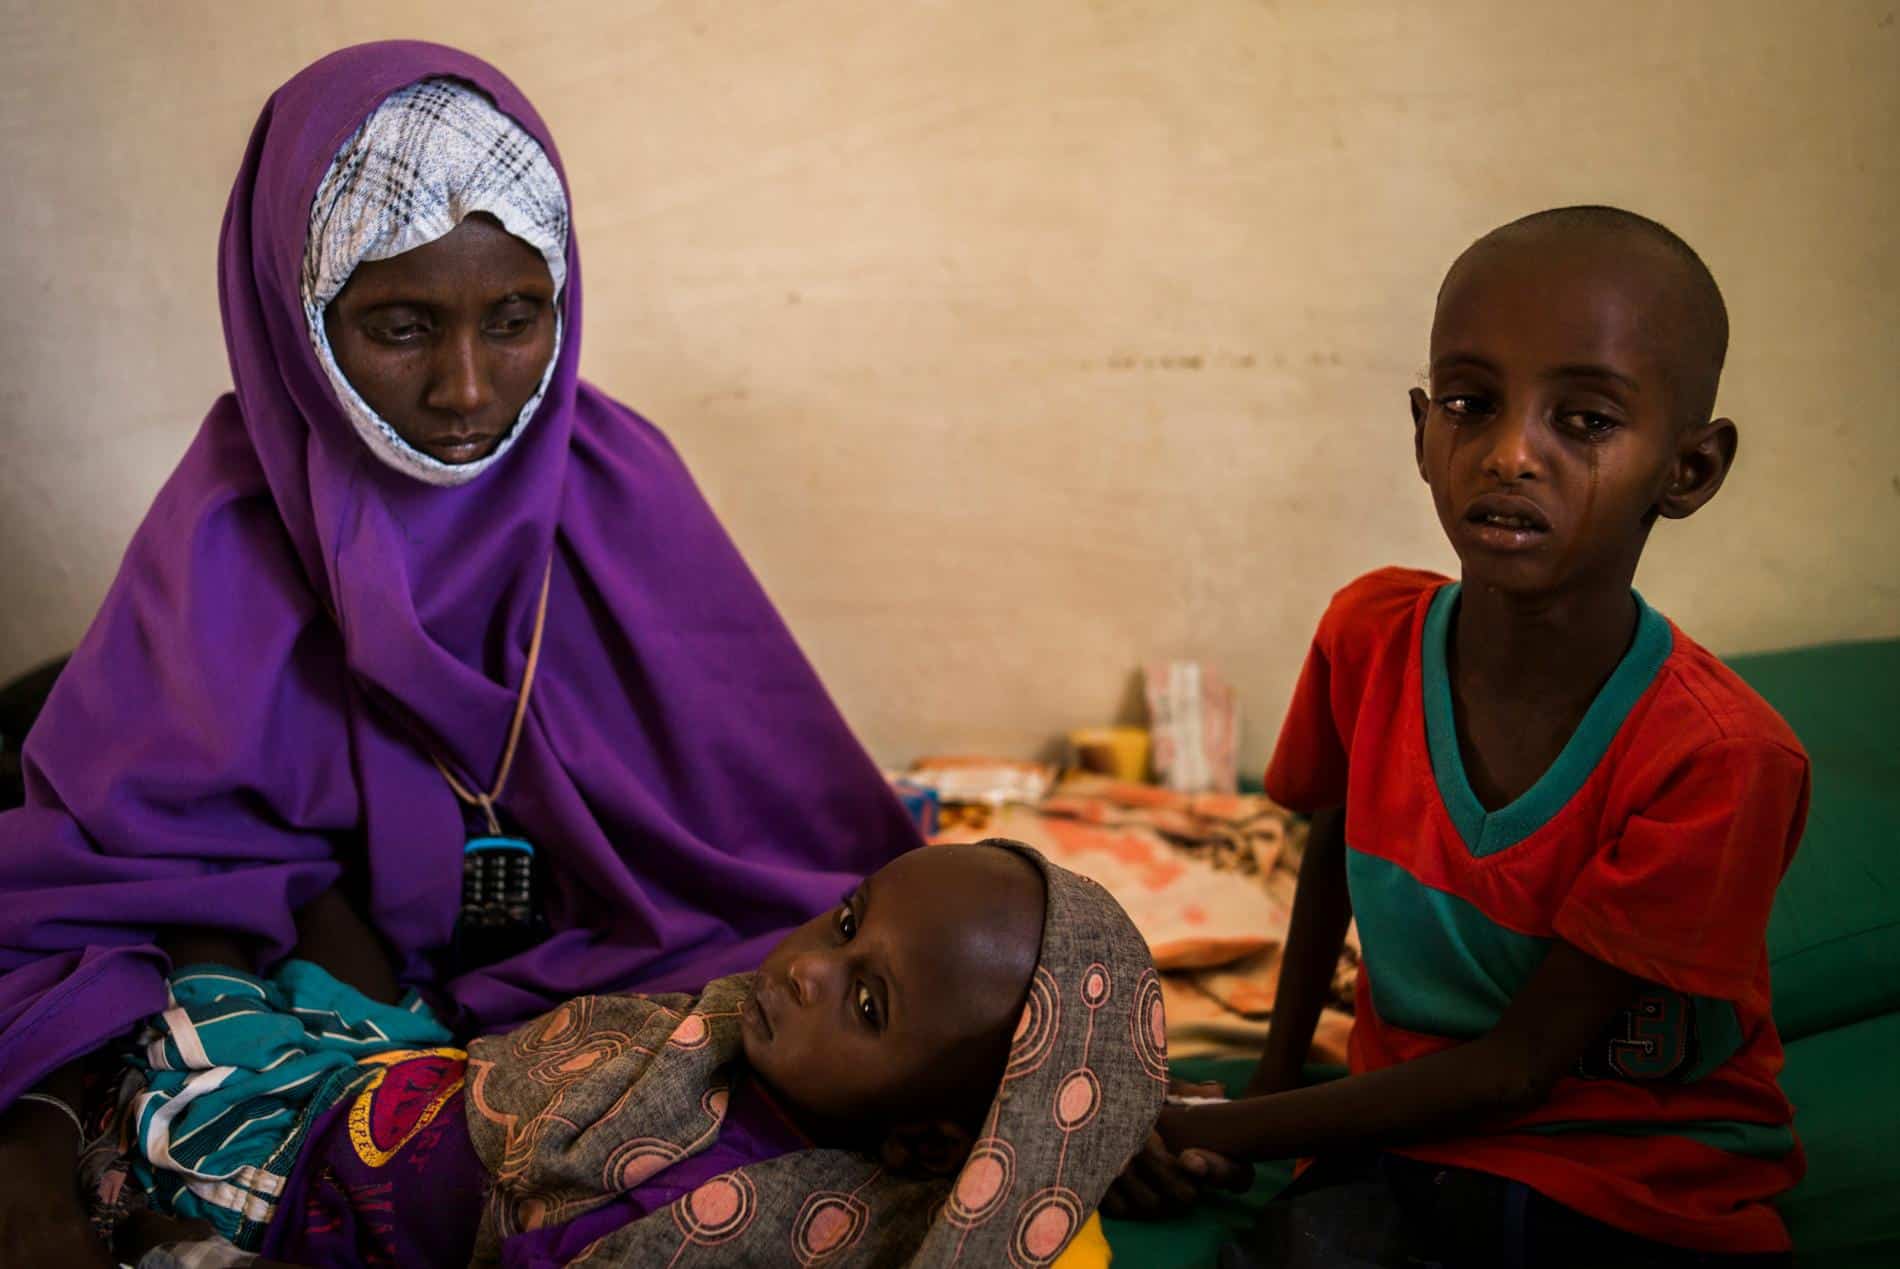 Sahro Mohamed Mumin holds her two-year-old son, Abdulrahman Mahamud, inside the health clinic in the Shada IDP camp. Abdulrahman was diagnosed with pneumonia and his brother Abullahi with bronchitis. Both also suffer from severe malnutrition. The family traveled for nearly 100 miles to reach the camp after they lost all their livestock. [Source: National Geographic]